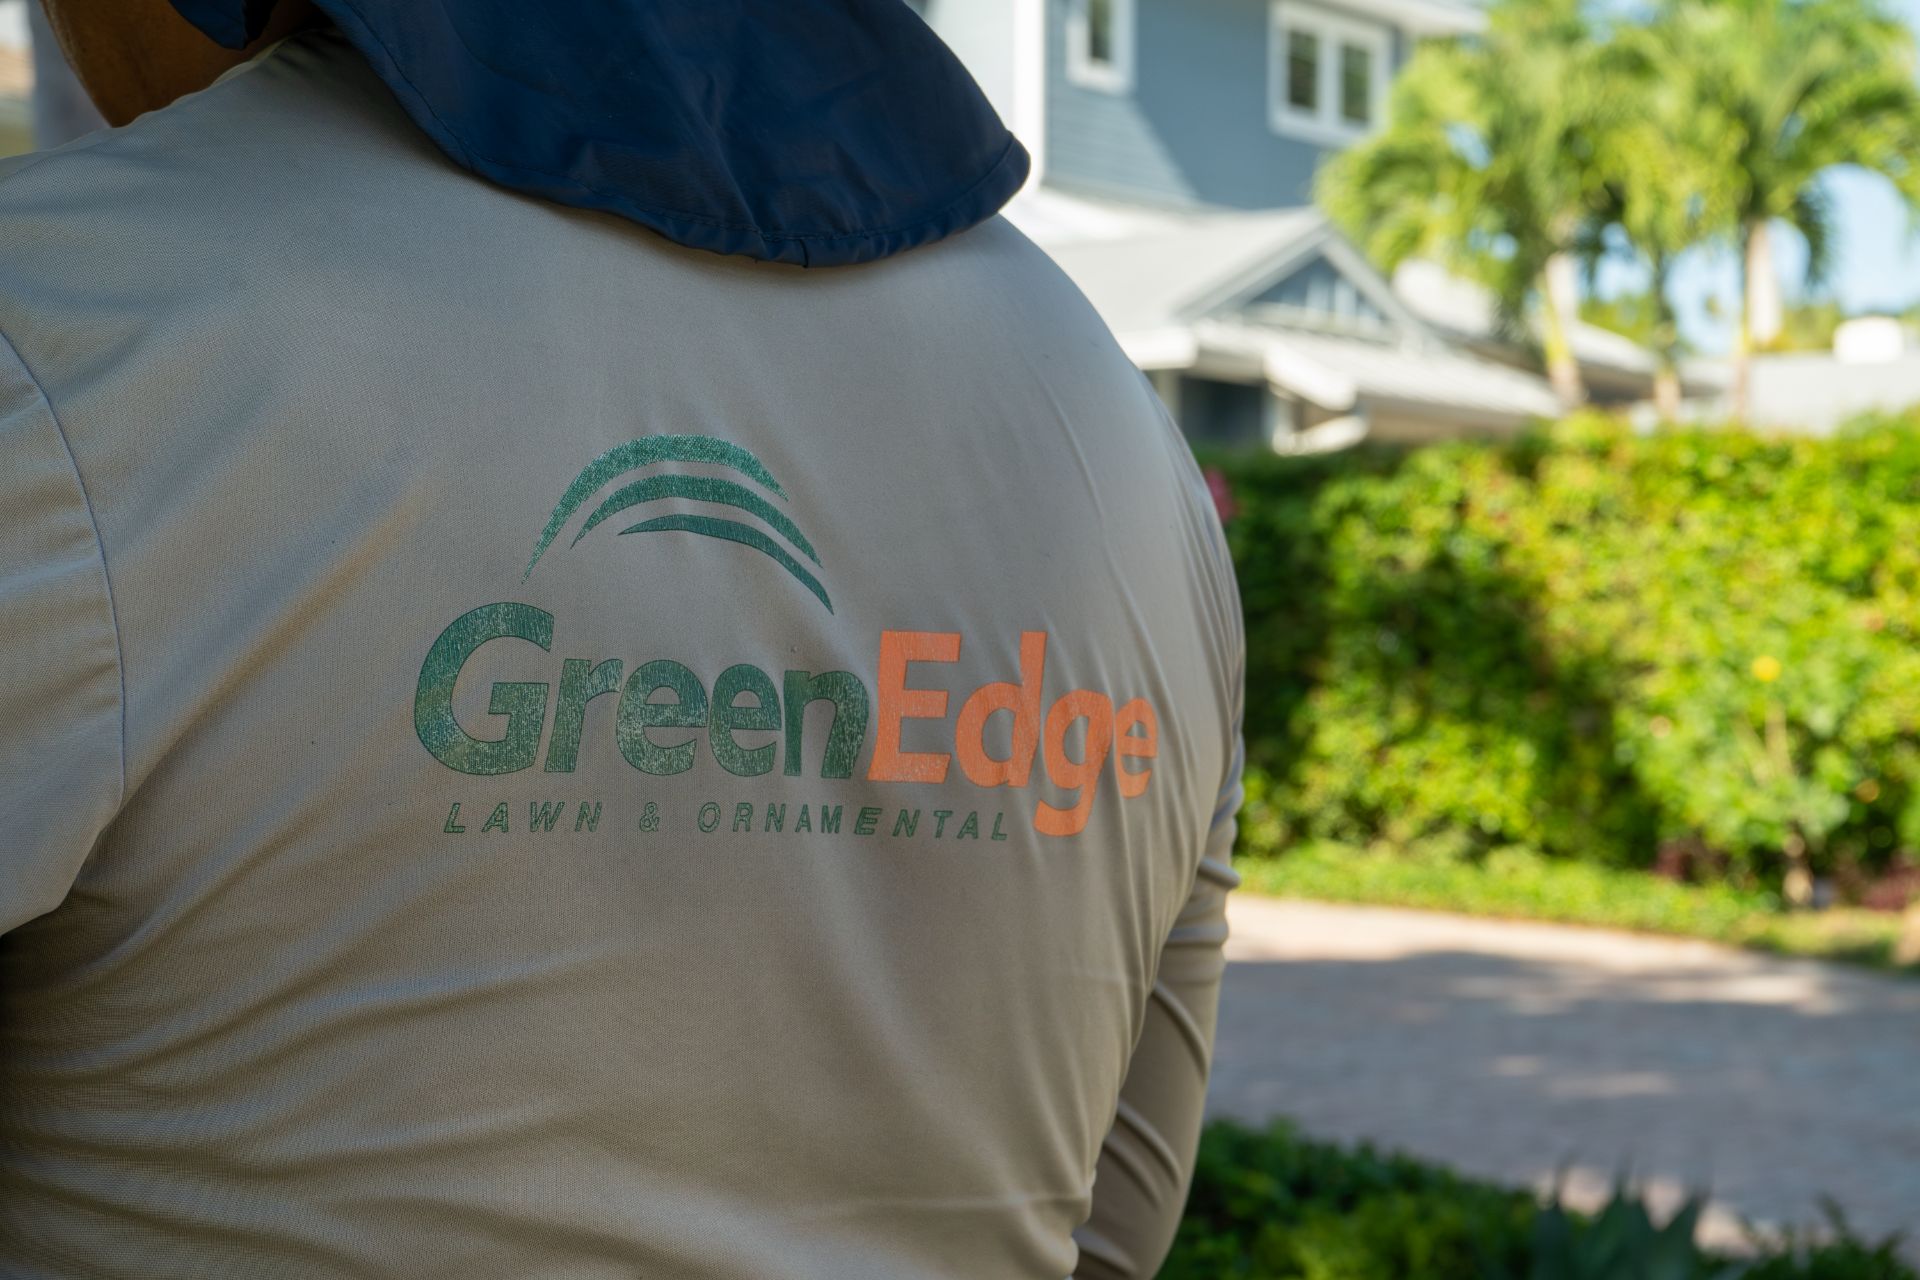 A GreenEdge staff member proudly donning the GreenEdge uniform in Sarasota. Our uniform represents professionalism, expertise, and dedication to providing exceptional landscaping services. Trust GreenEdge for a team that takes pride in their appearance and delivers quality results for your outdoor spaces.